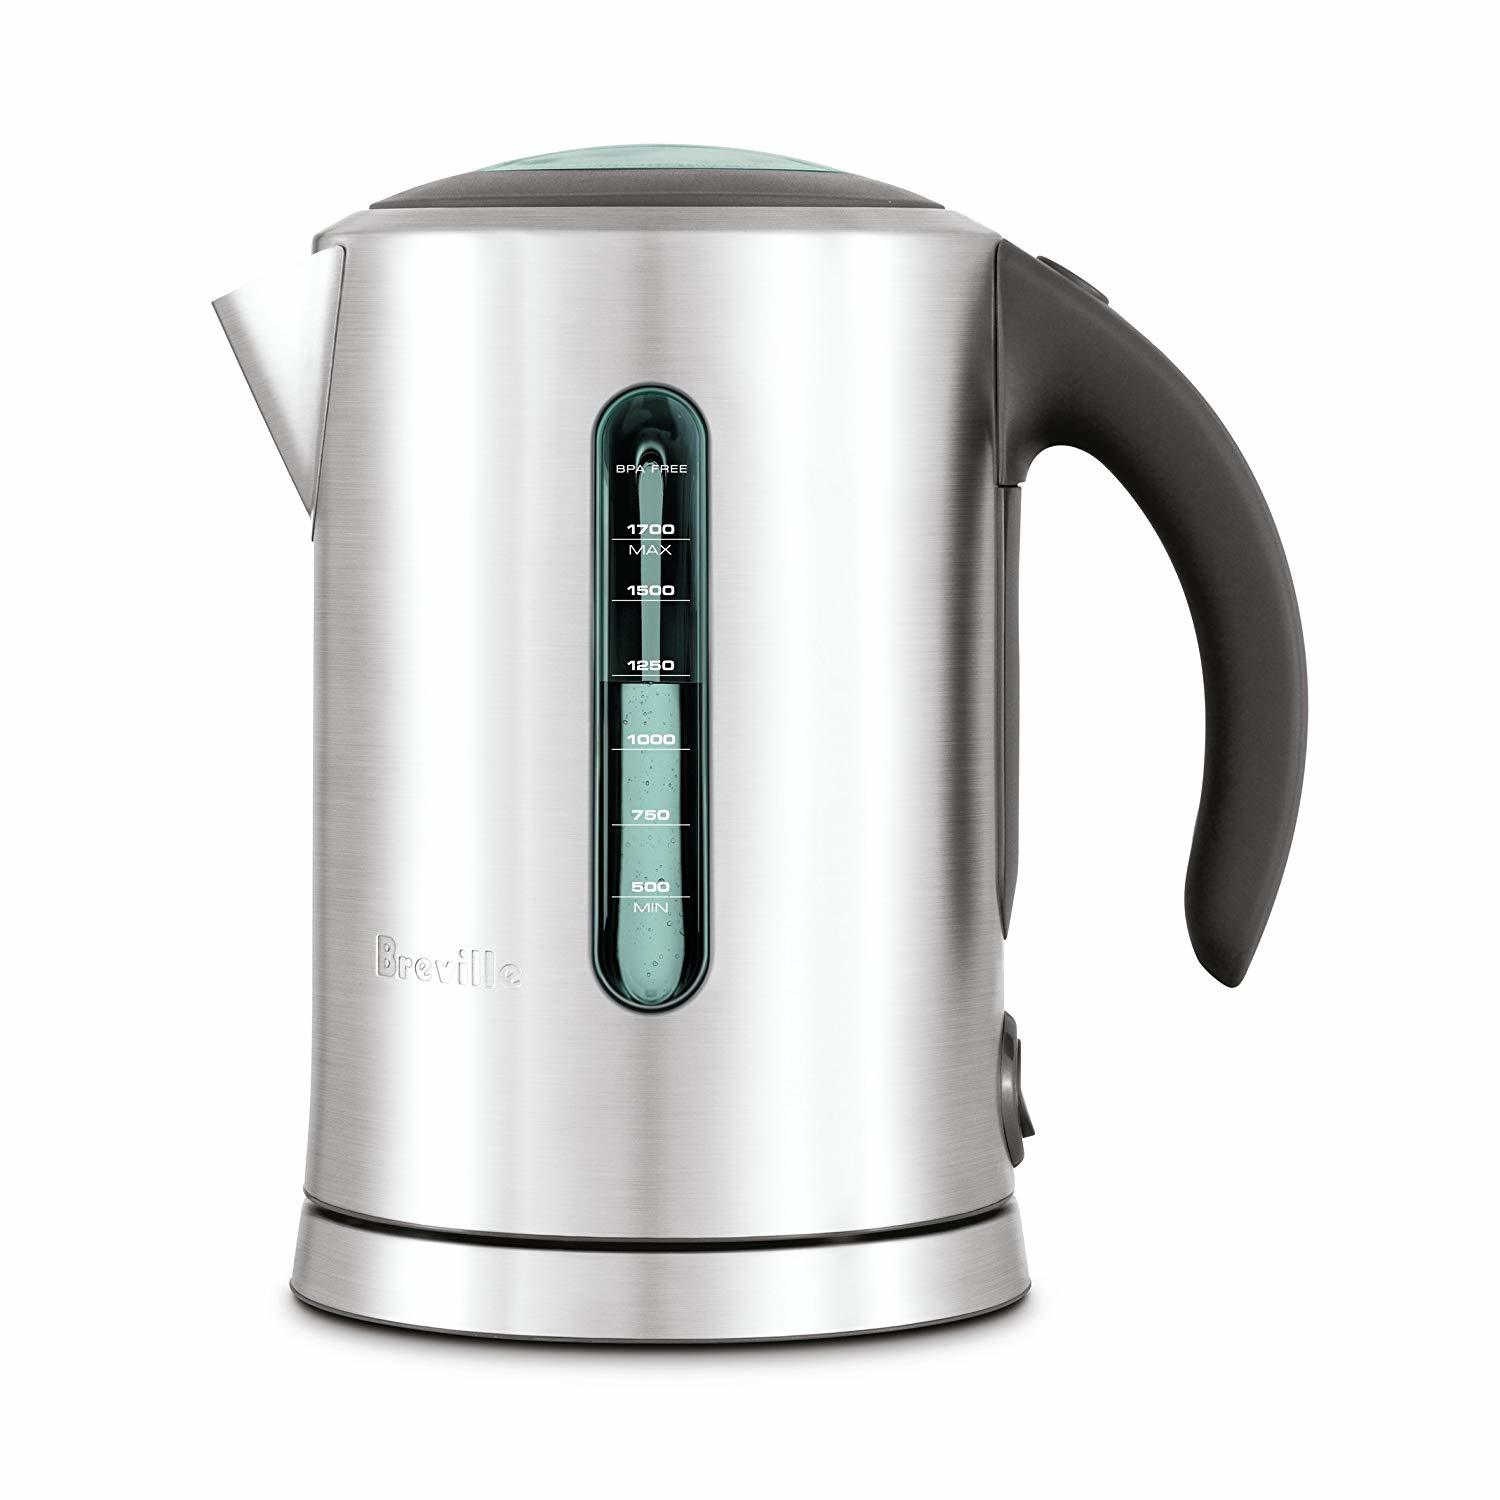 Breville Electric Kettle Review - The KE700BSS Rapid Heating Goodness